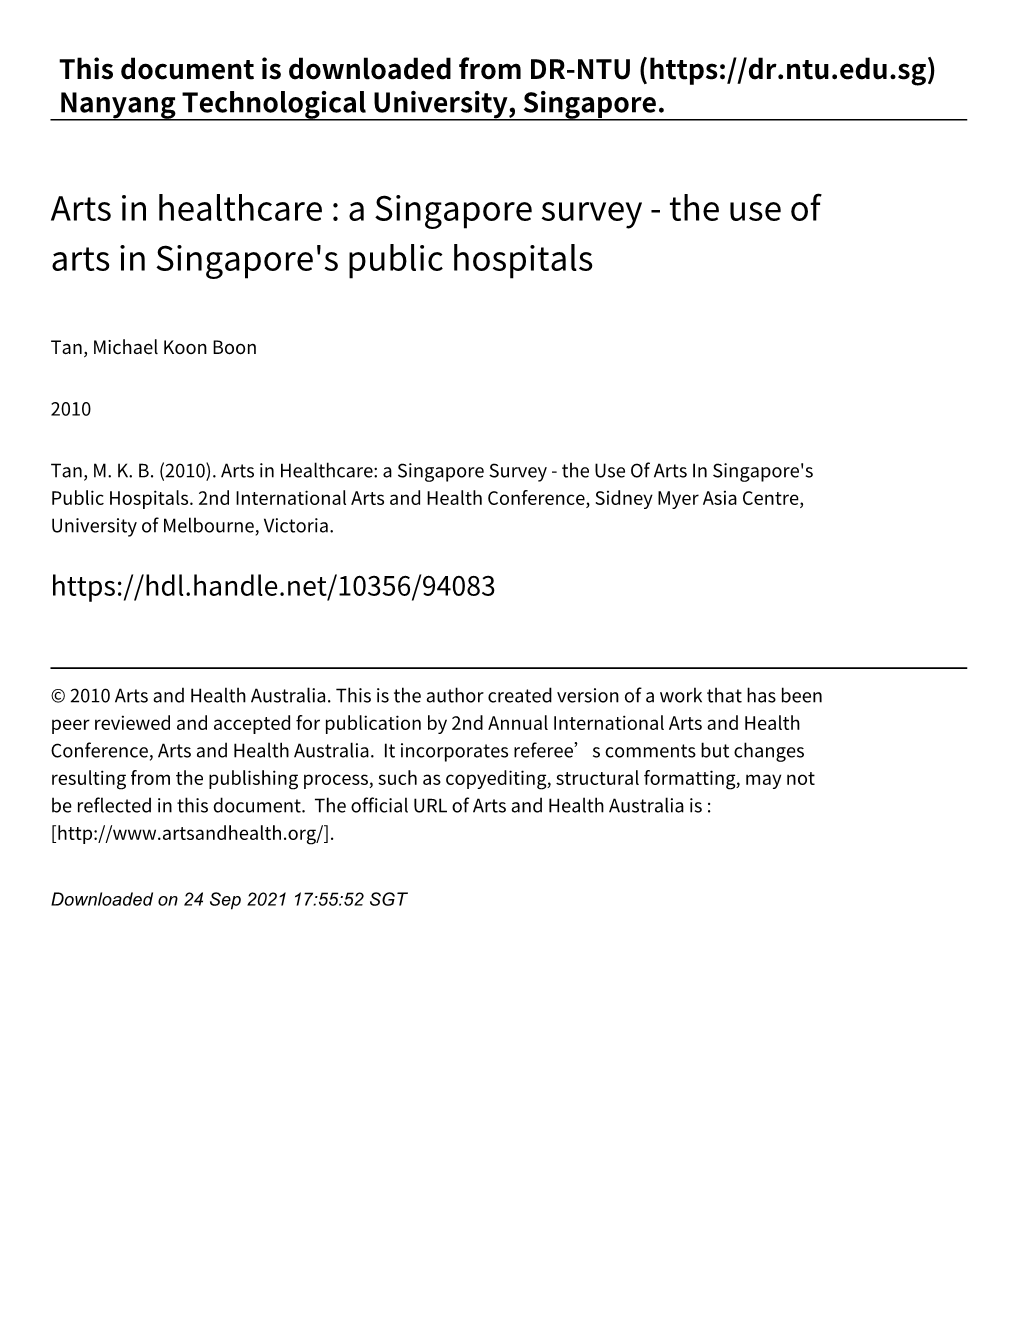 Arts in Healthcare : a Singapore Survey ‑ the Use of Arts in Singapore's Public Hospitals